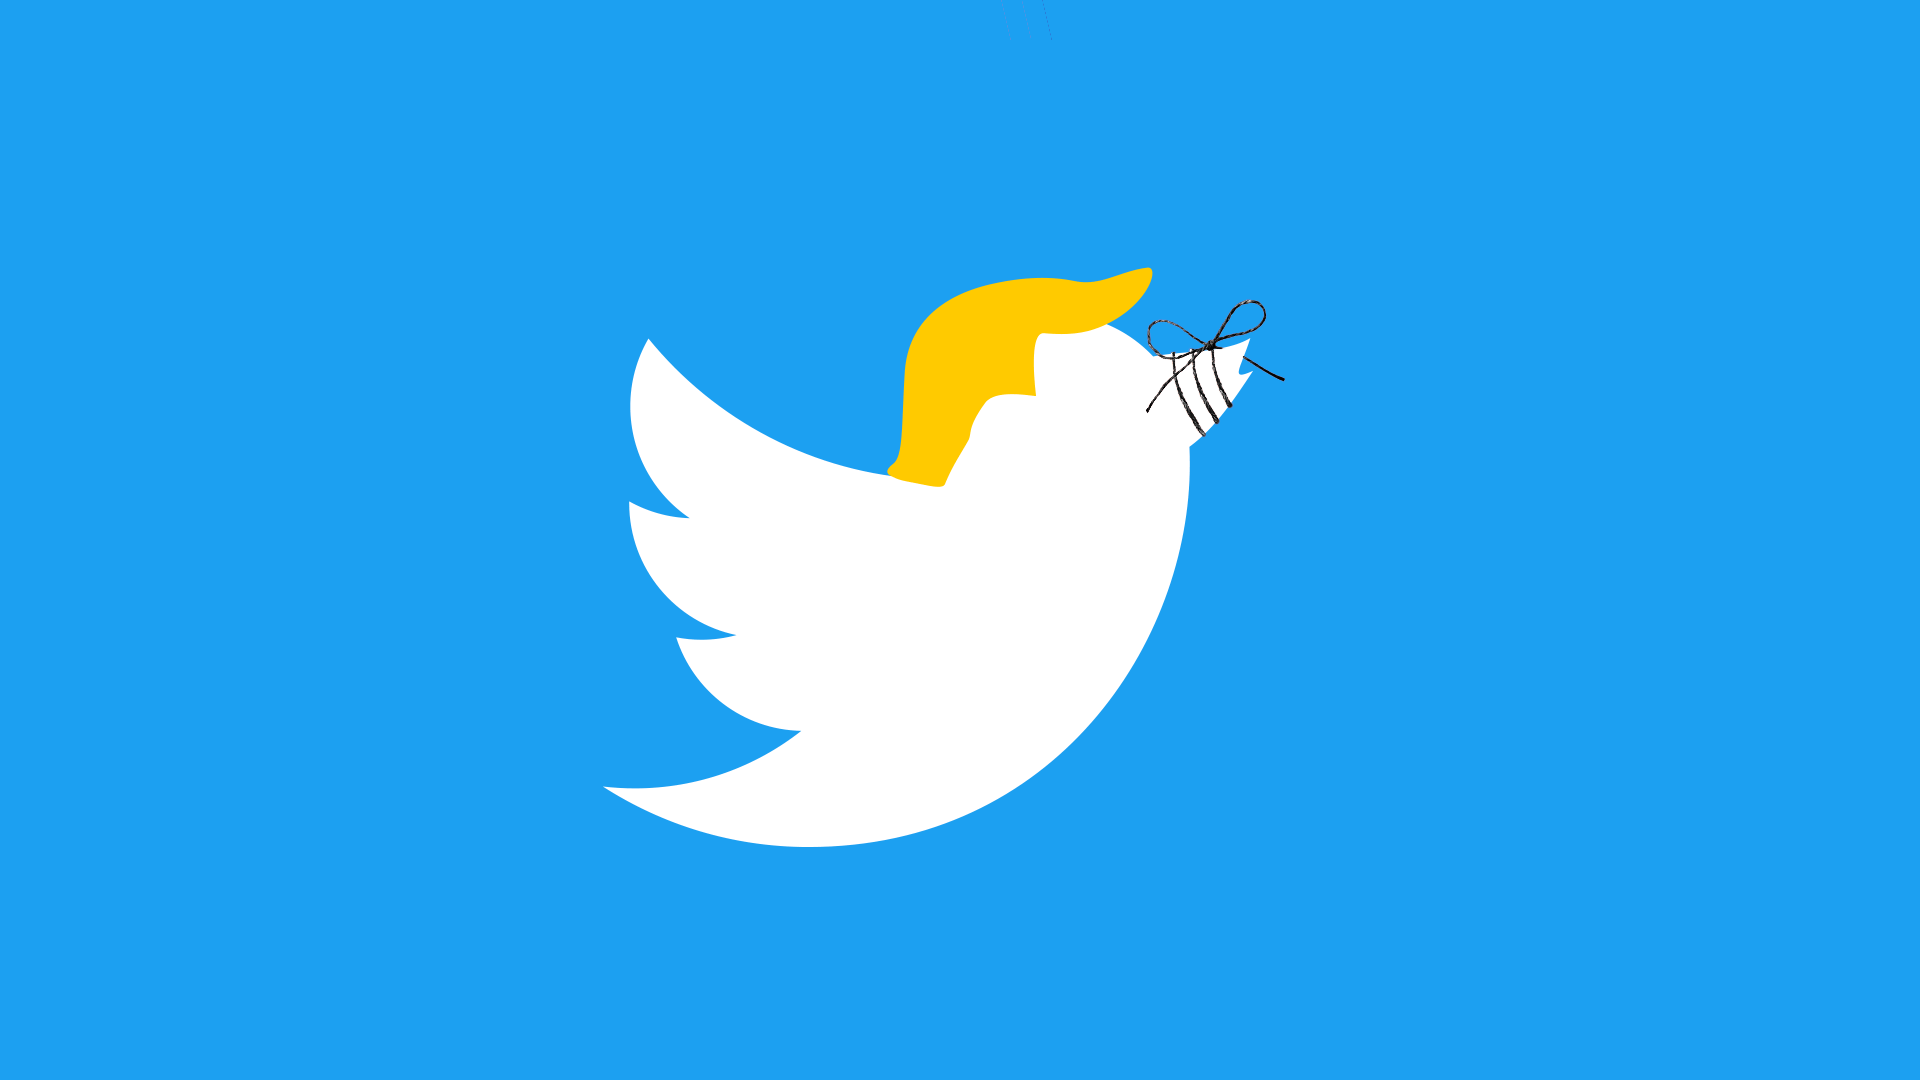 An illustration of the Twitter bird with Trump-style hair and string tied around the bird's beak